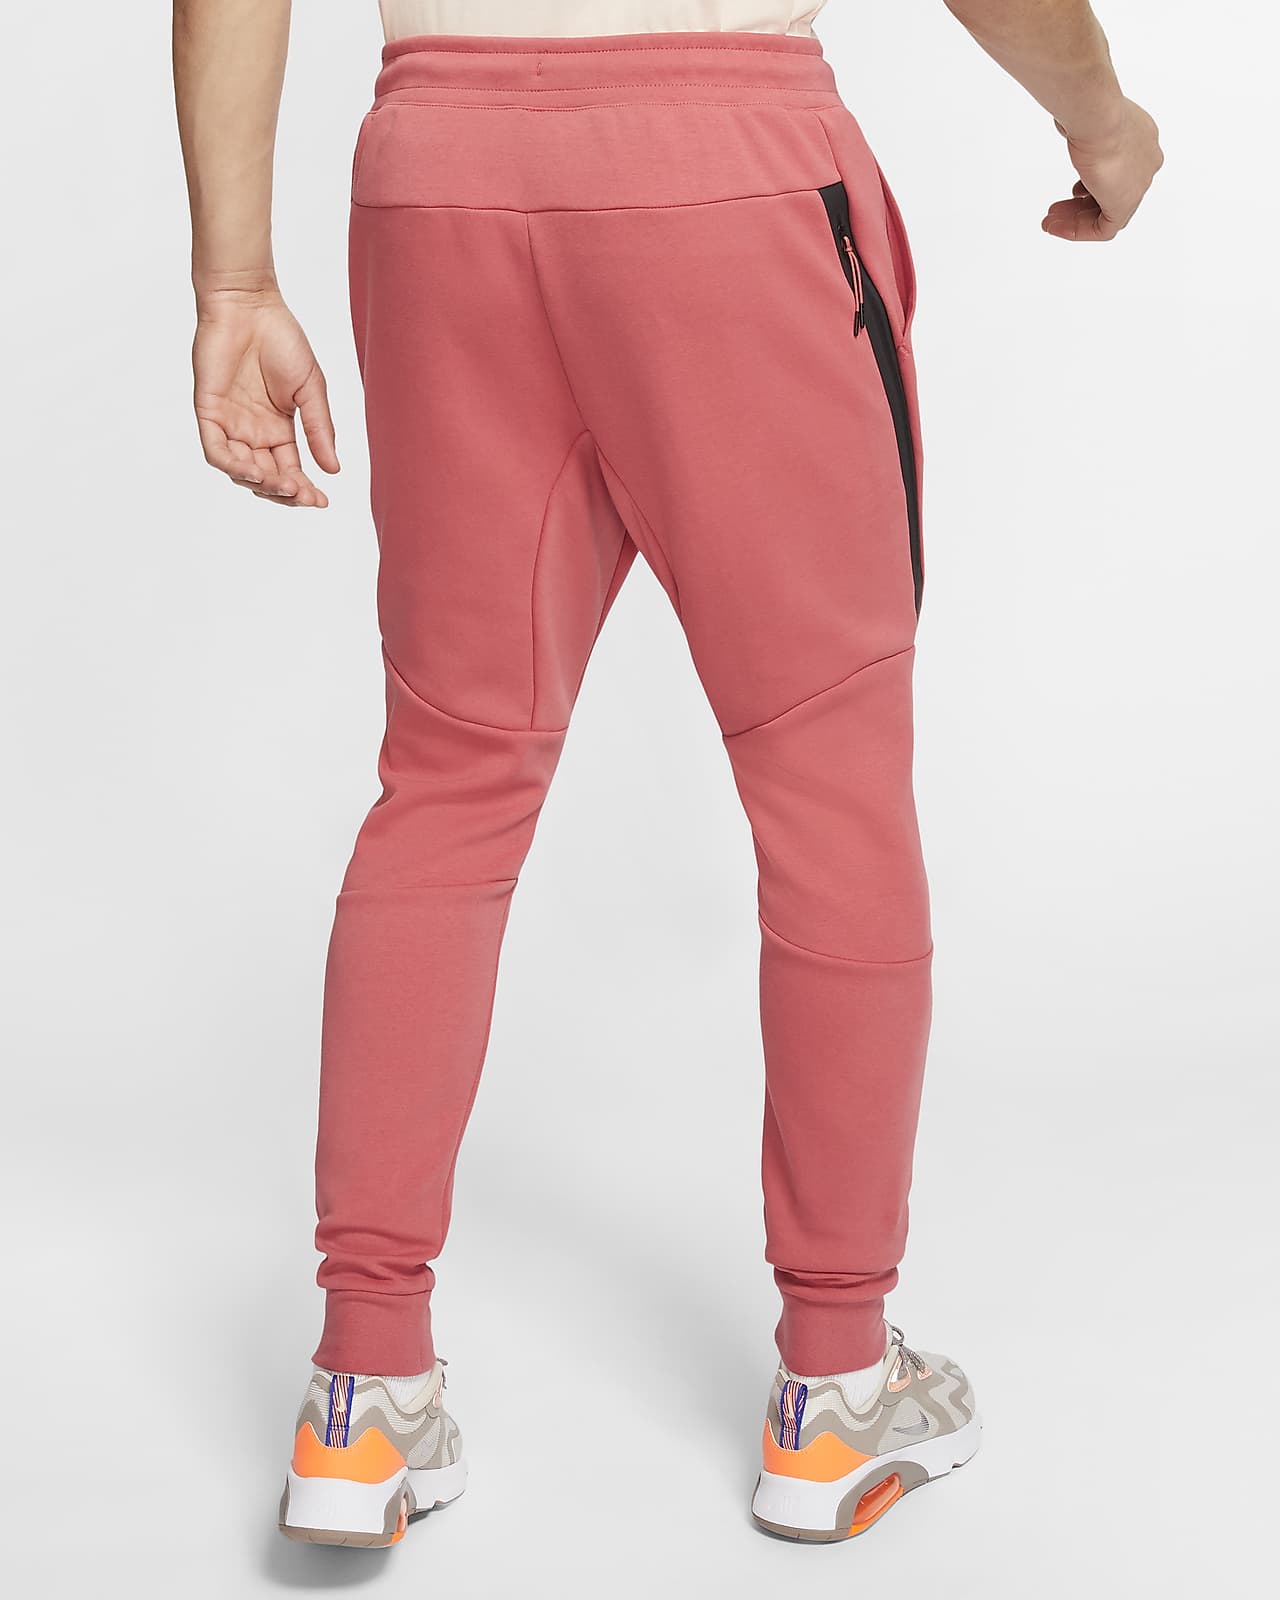 red and blue nike jogging suit